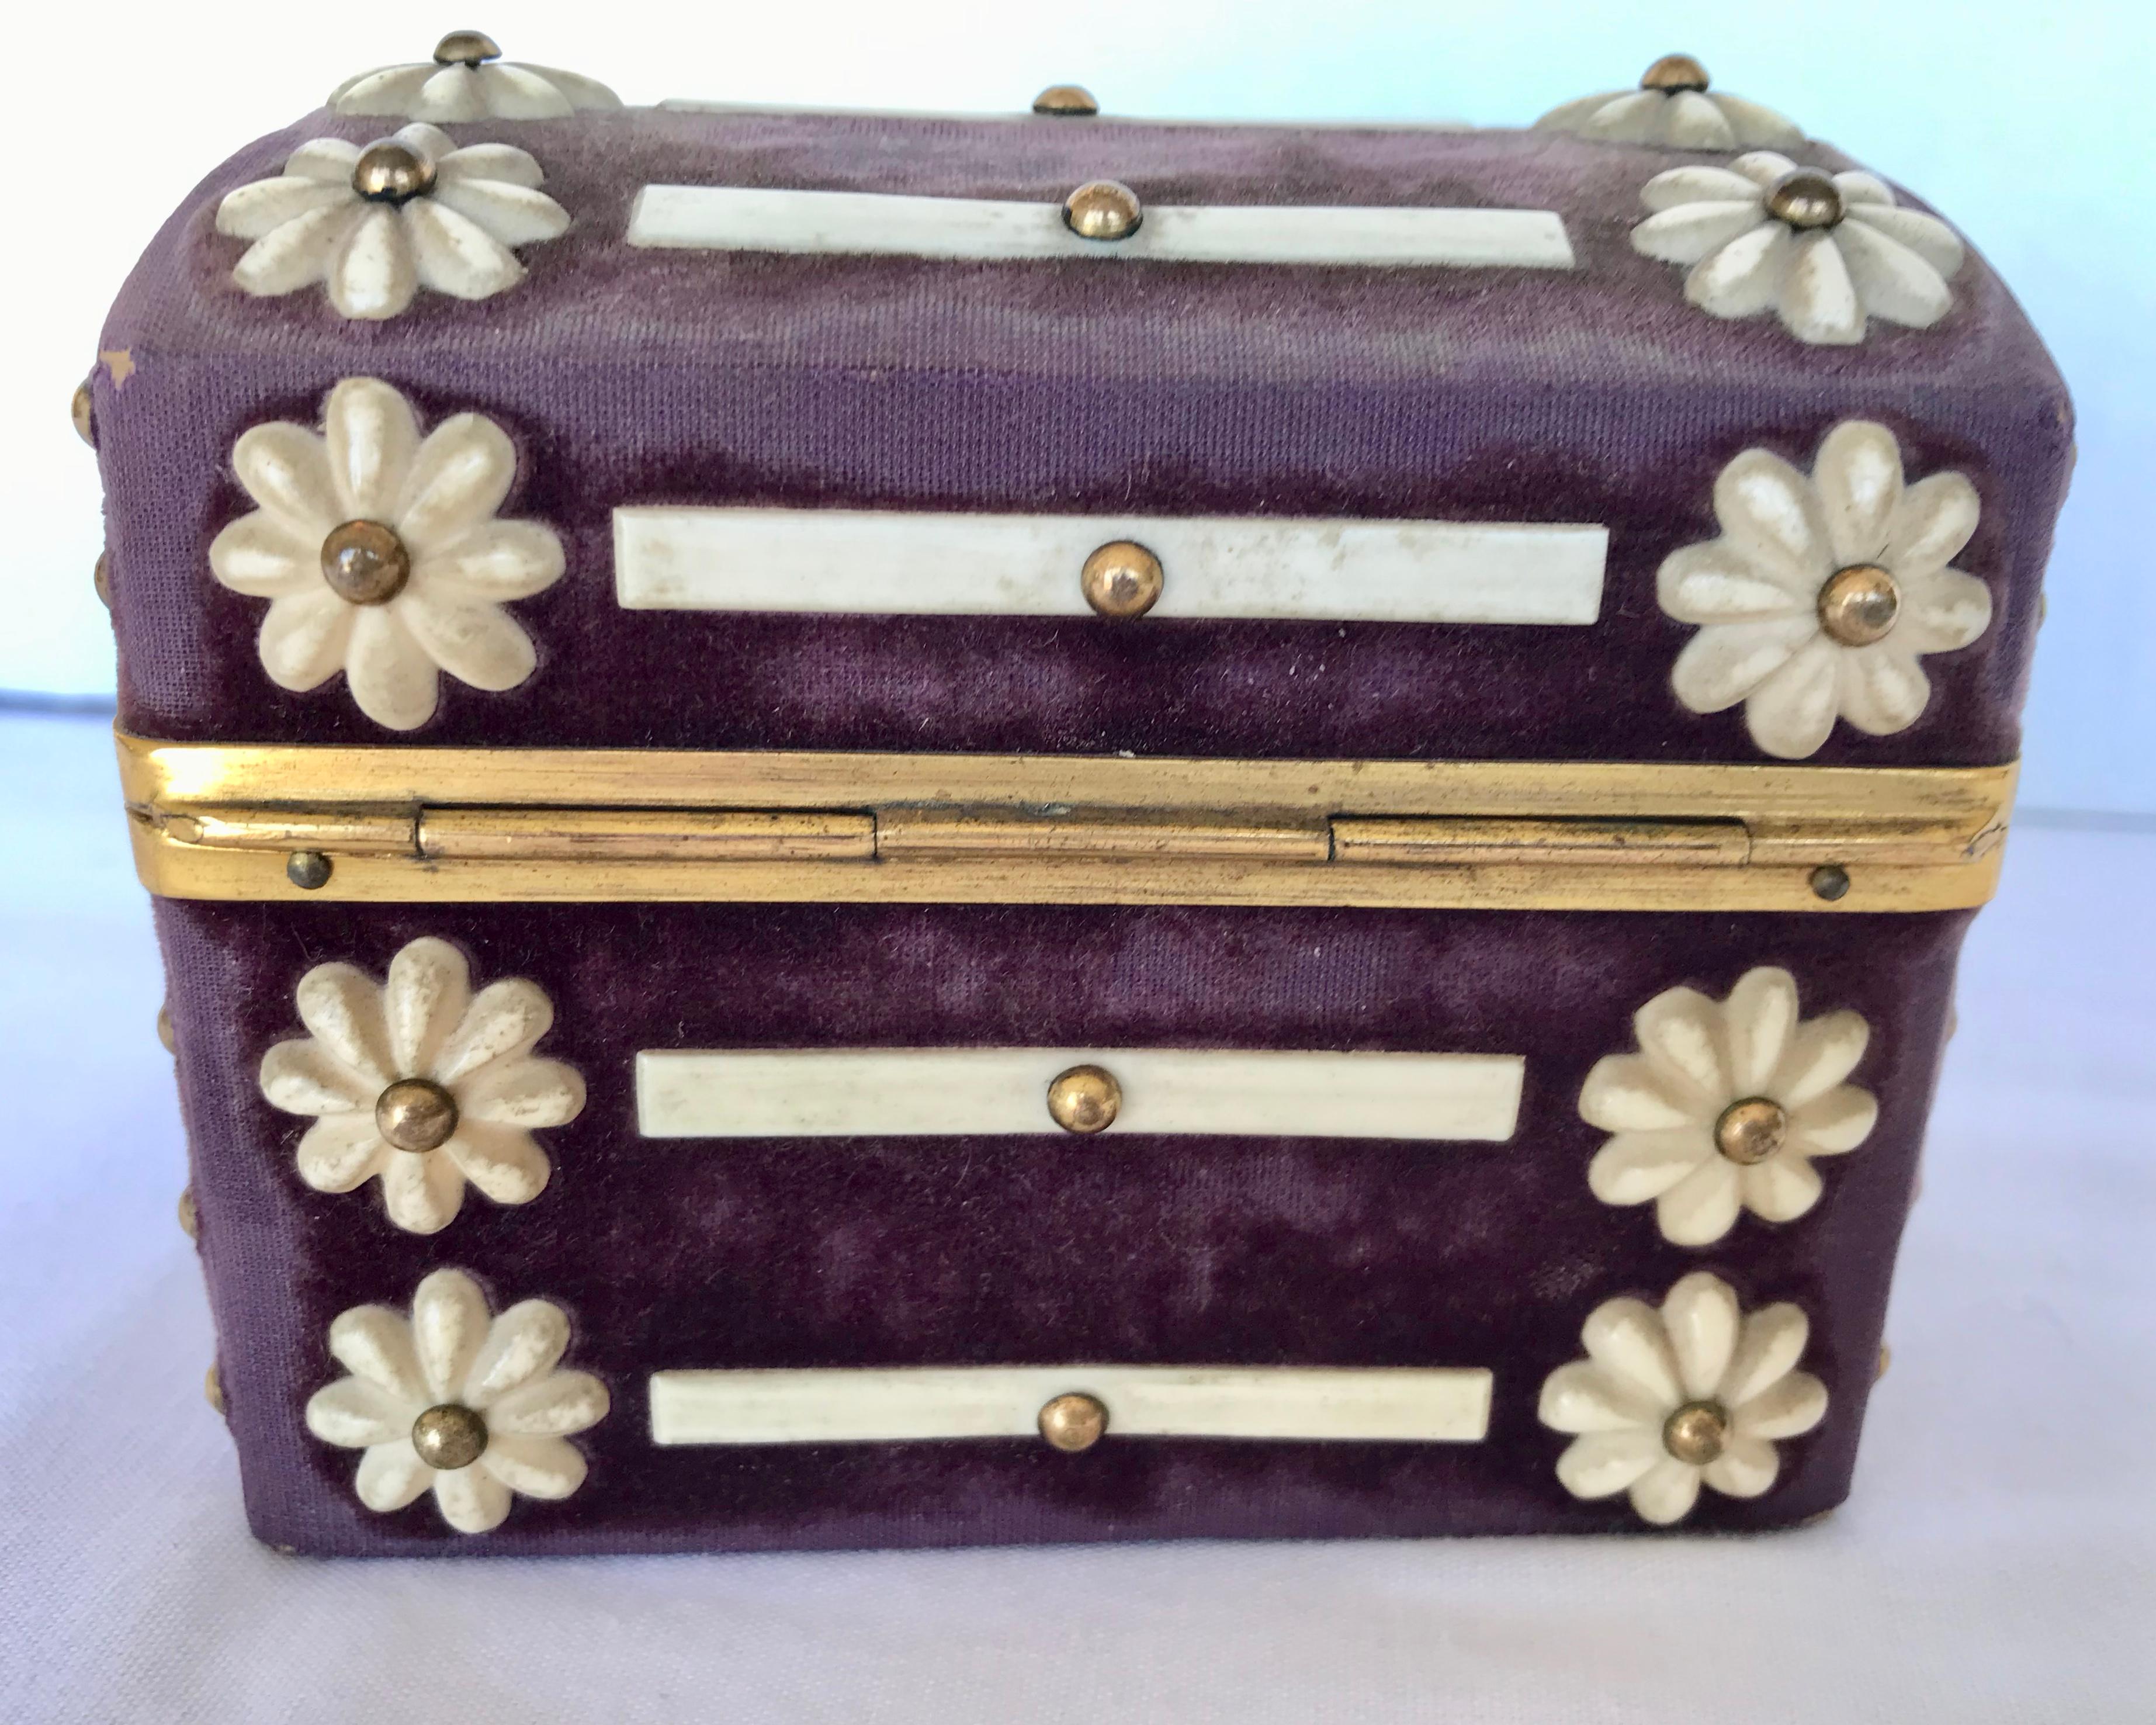 Mother-of-Pearl 19th Century English Dore' Mounted Travel Casket with 2 Scent Bottles